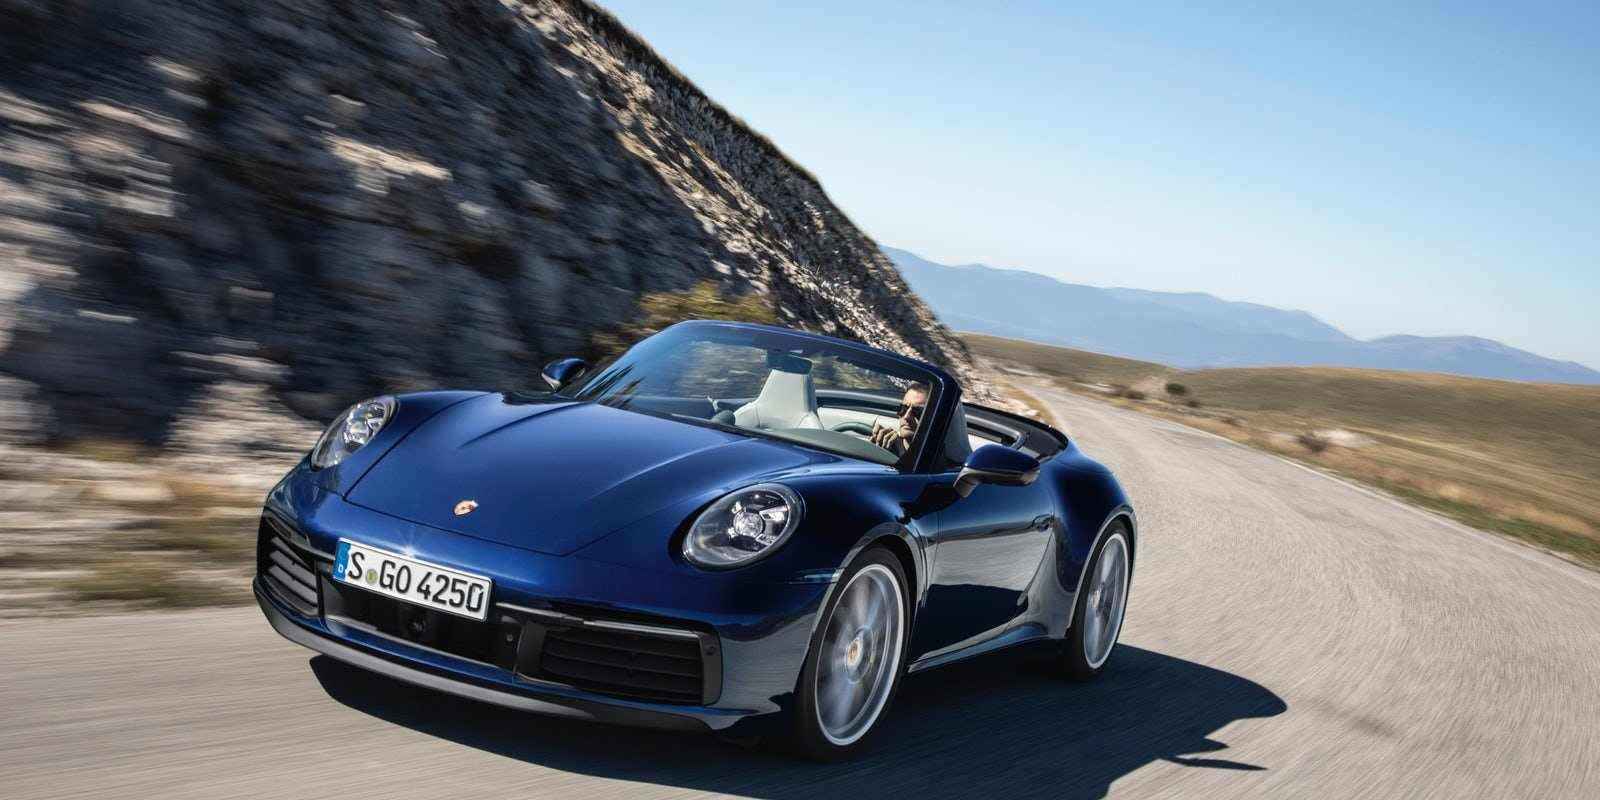 History Of Luxurious Porsche Car Vehicle Tracking System